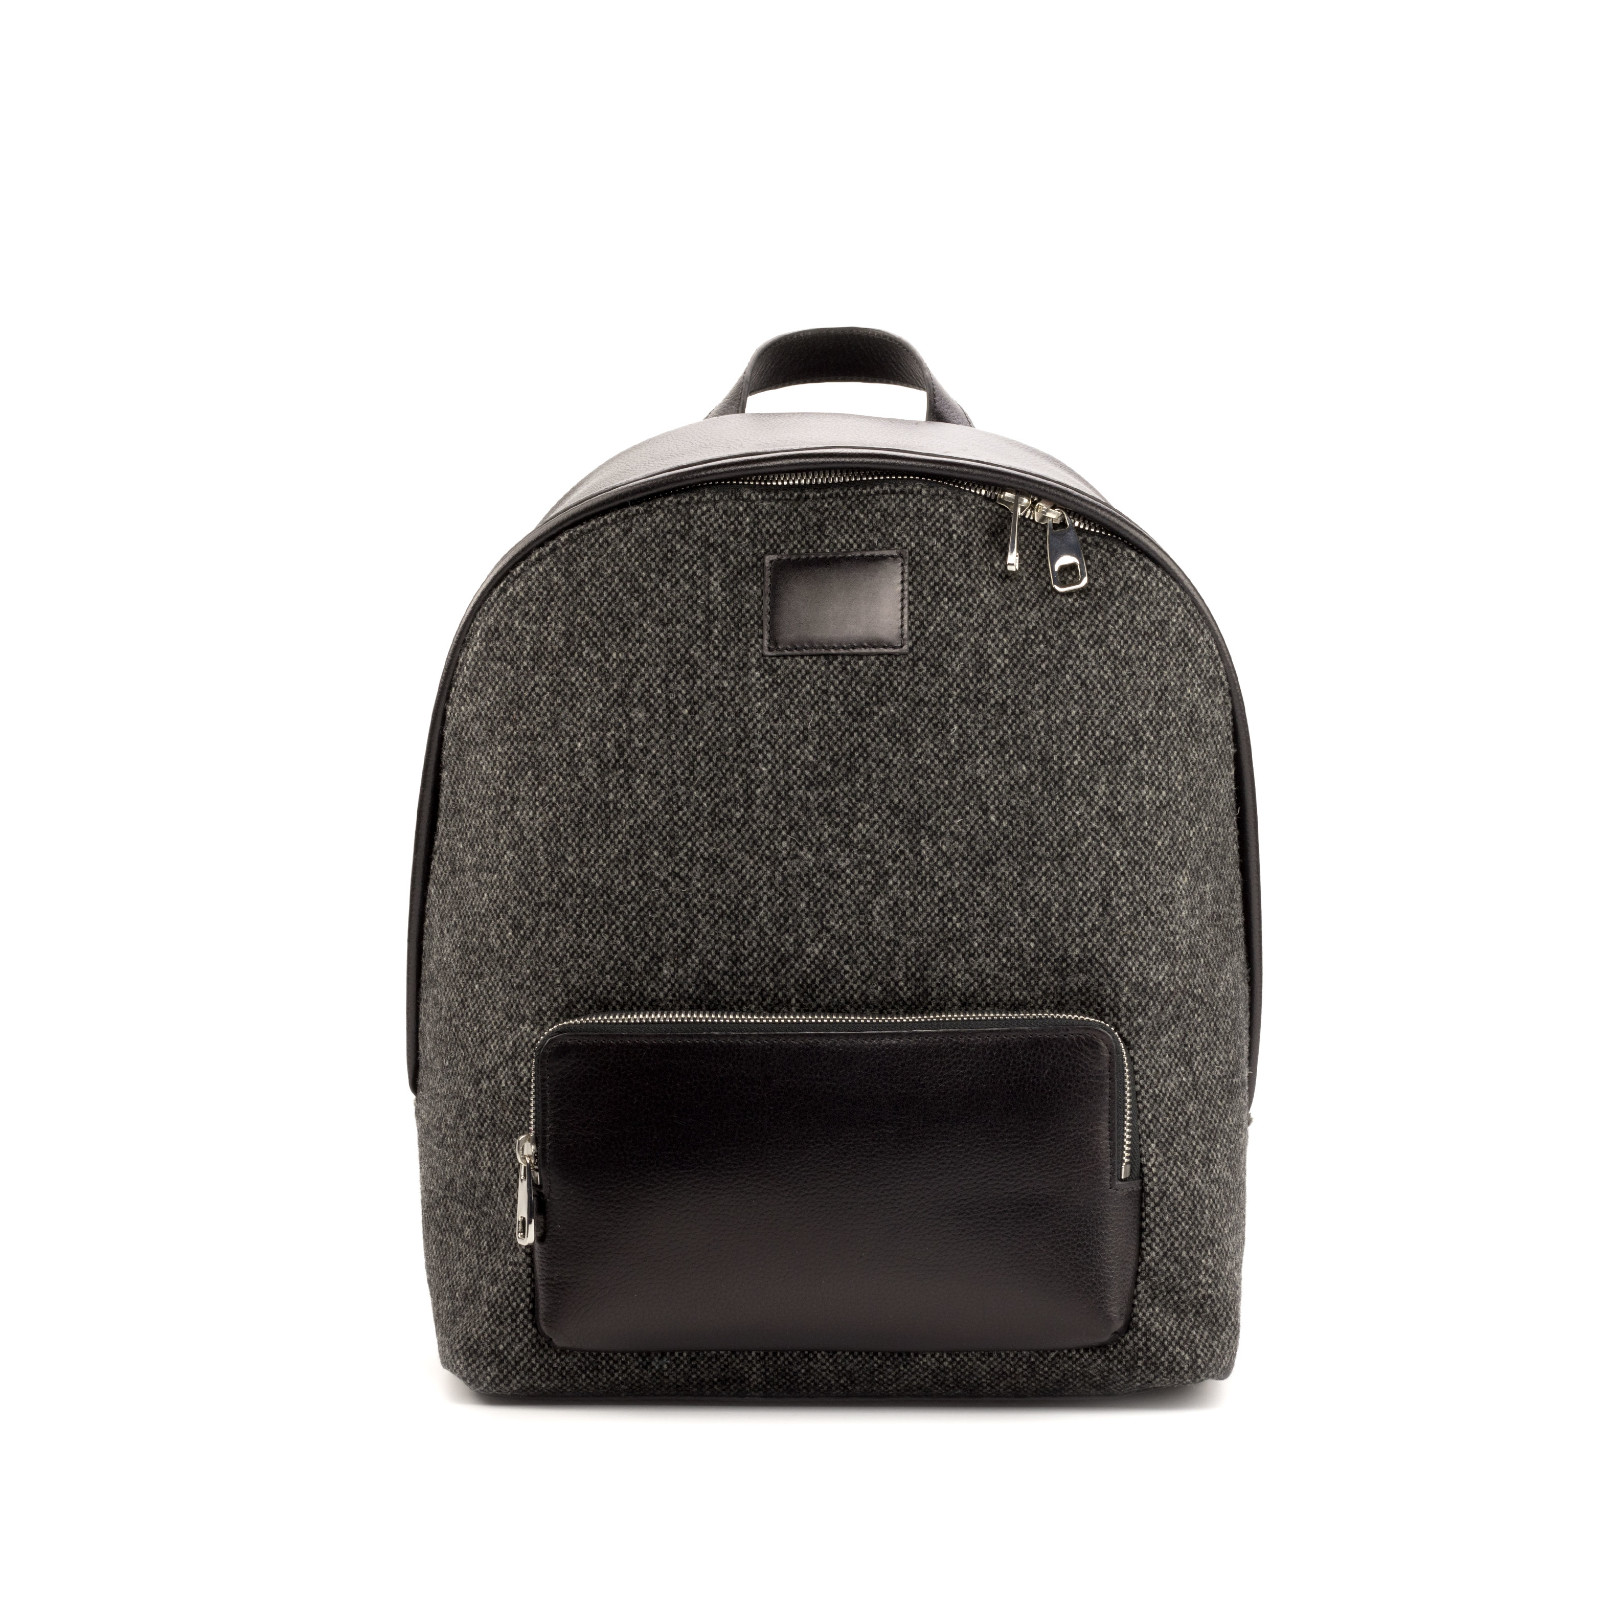 black leather Backpack Product Image